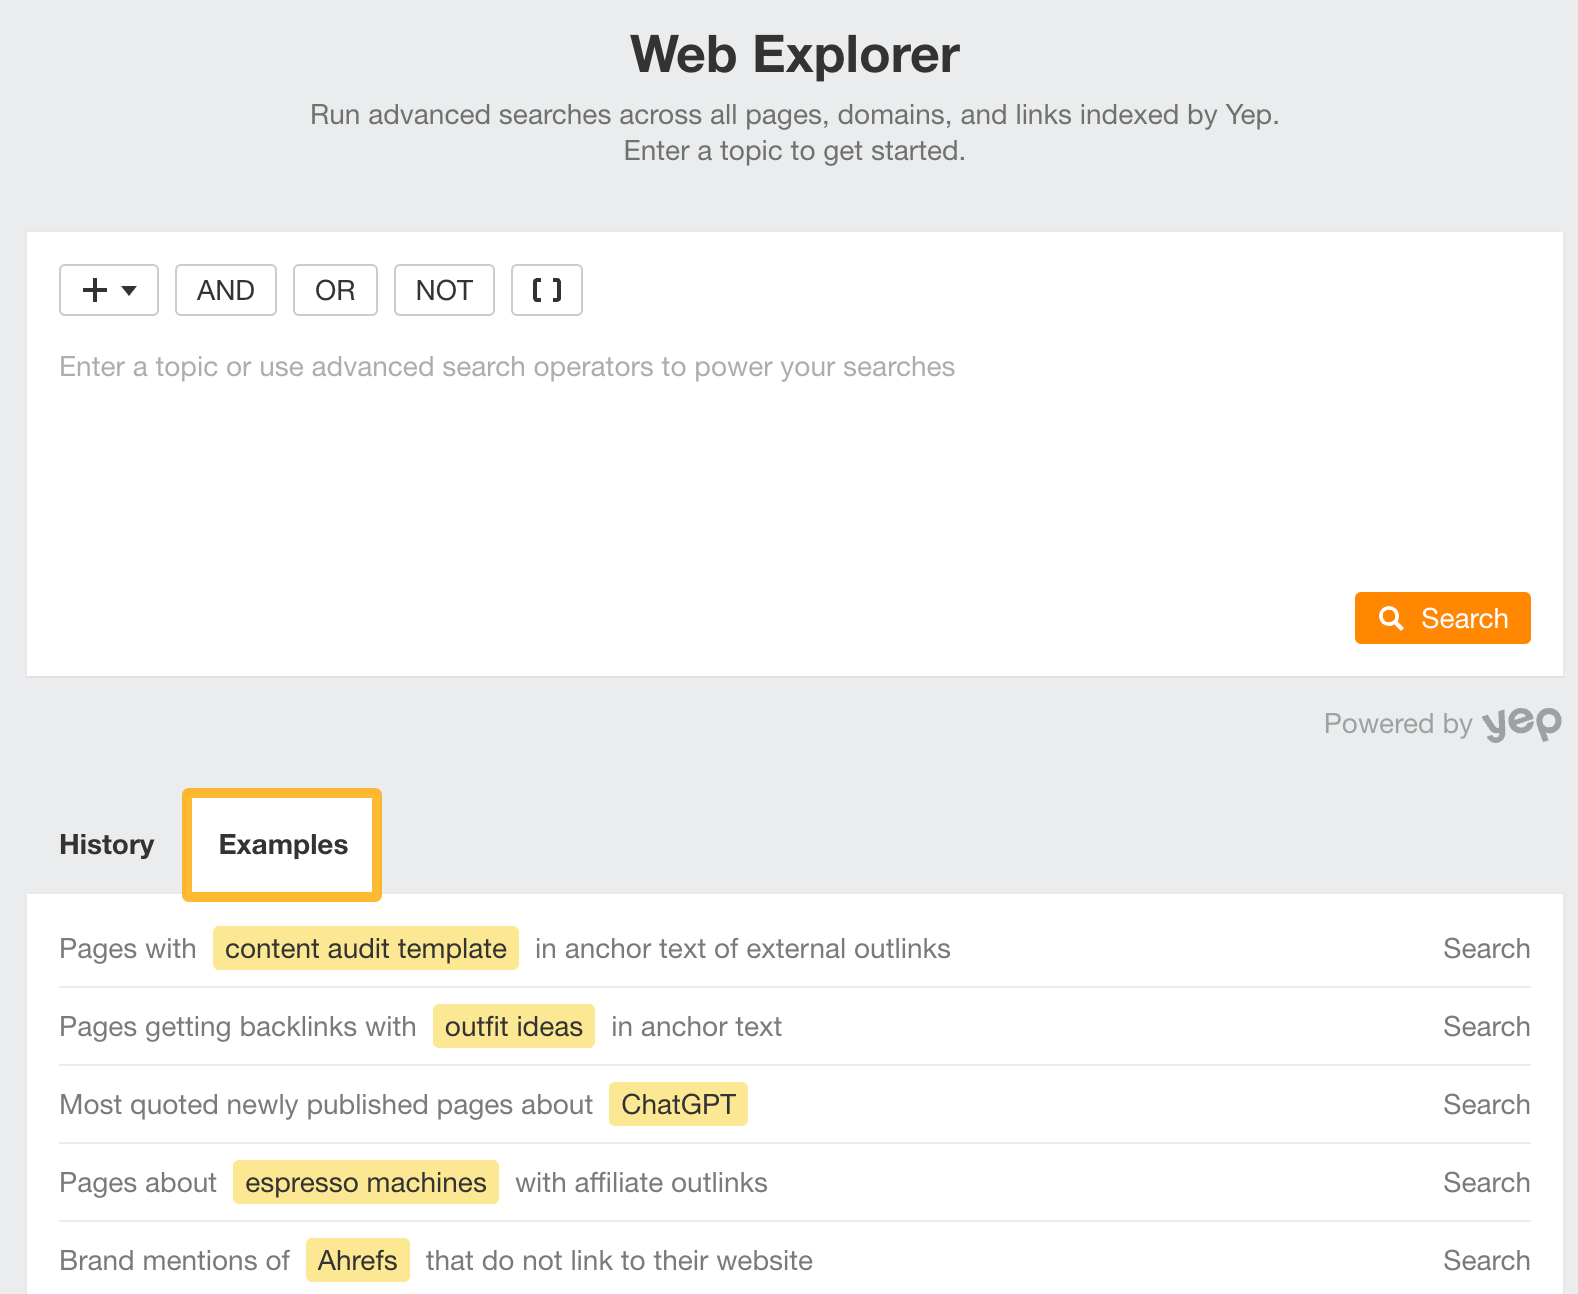 Web Explorer has an examples tab to help you find more use cases